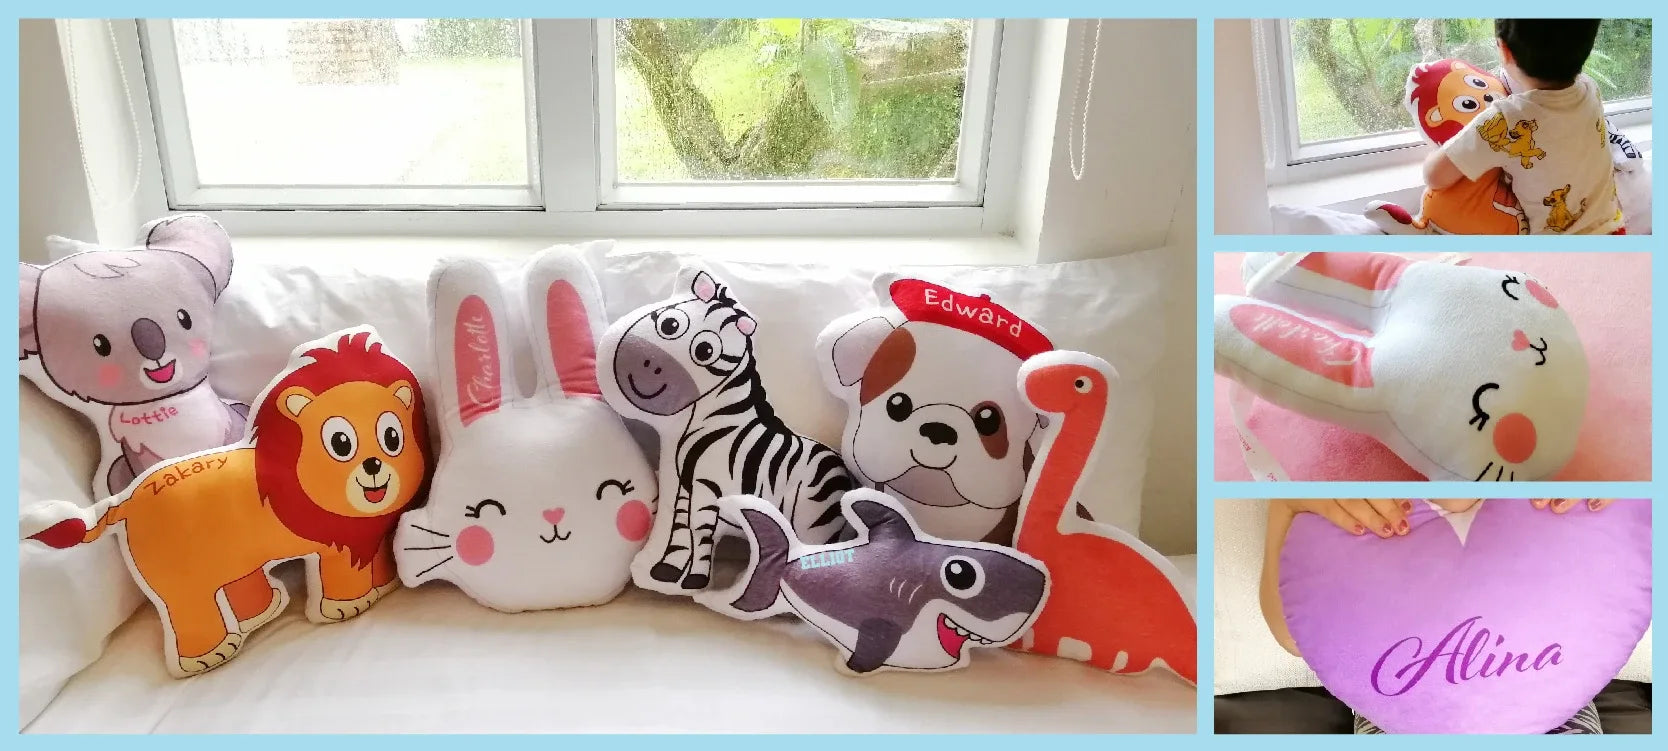 A collage of personalised Pillow-Pals in different setting, each showcasing a different character